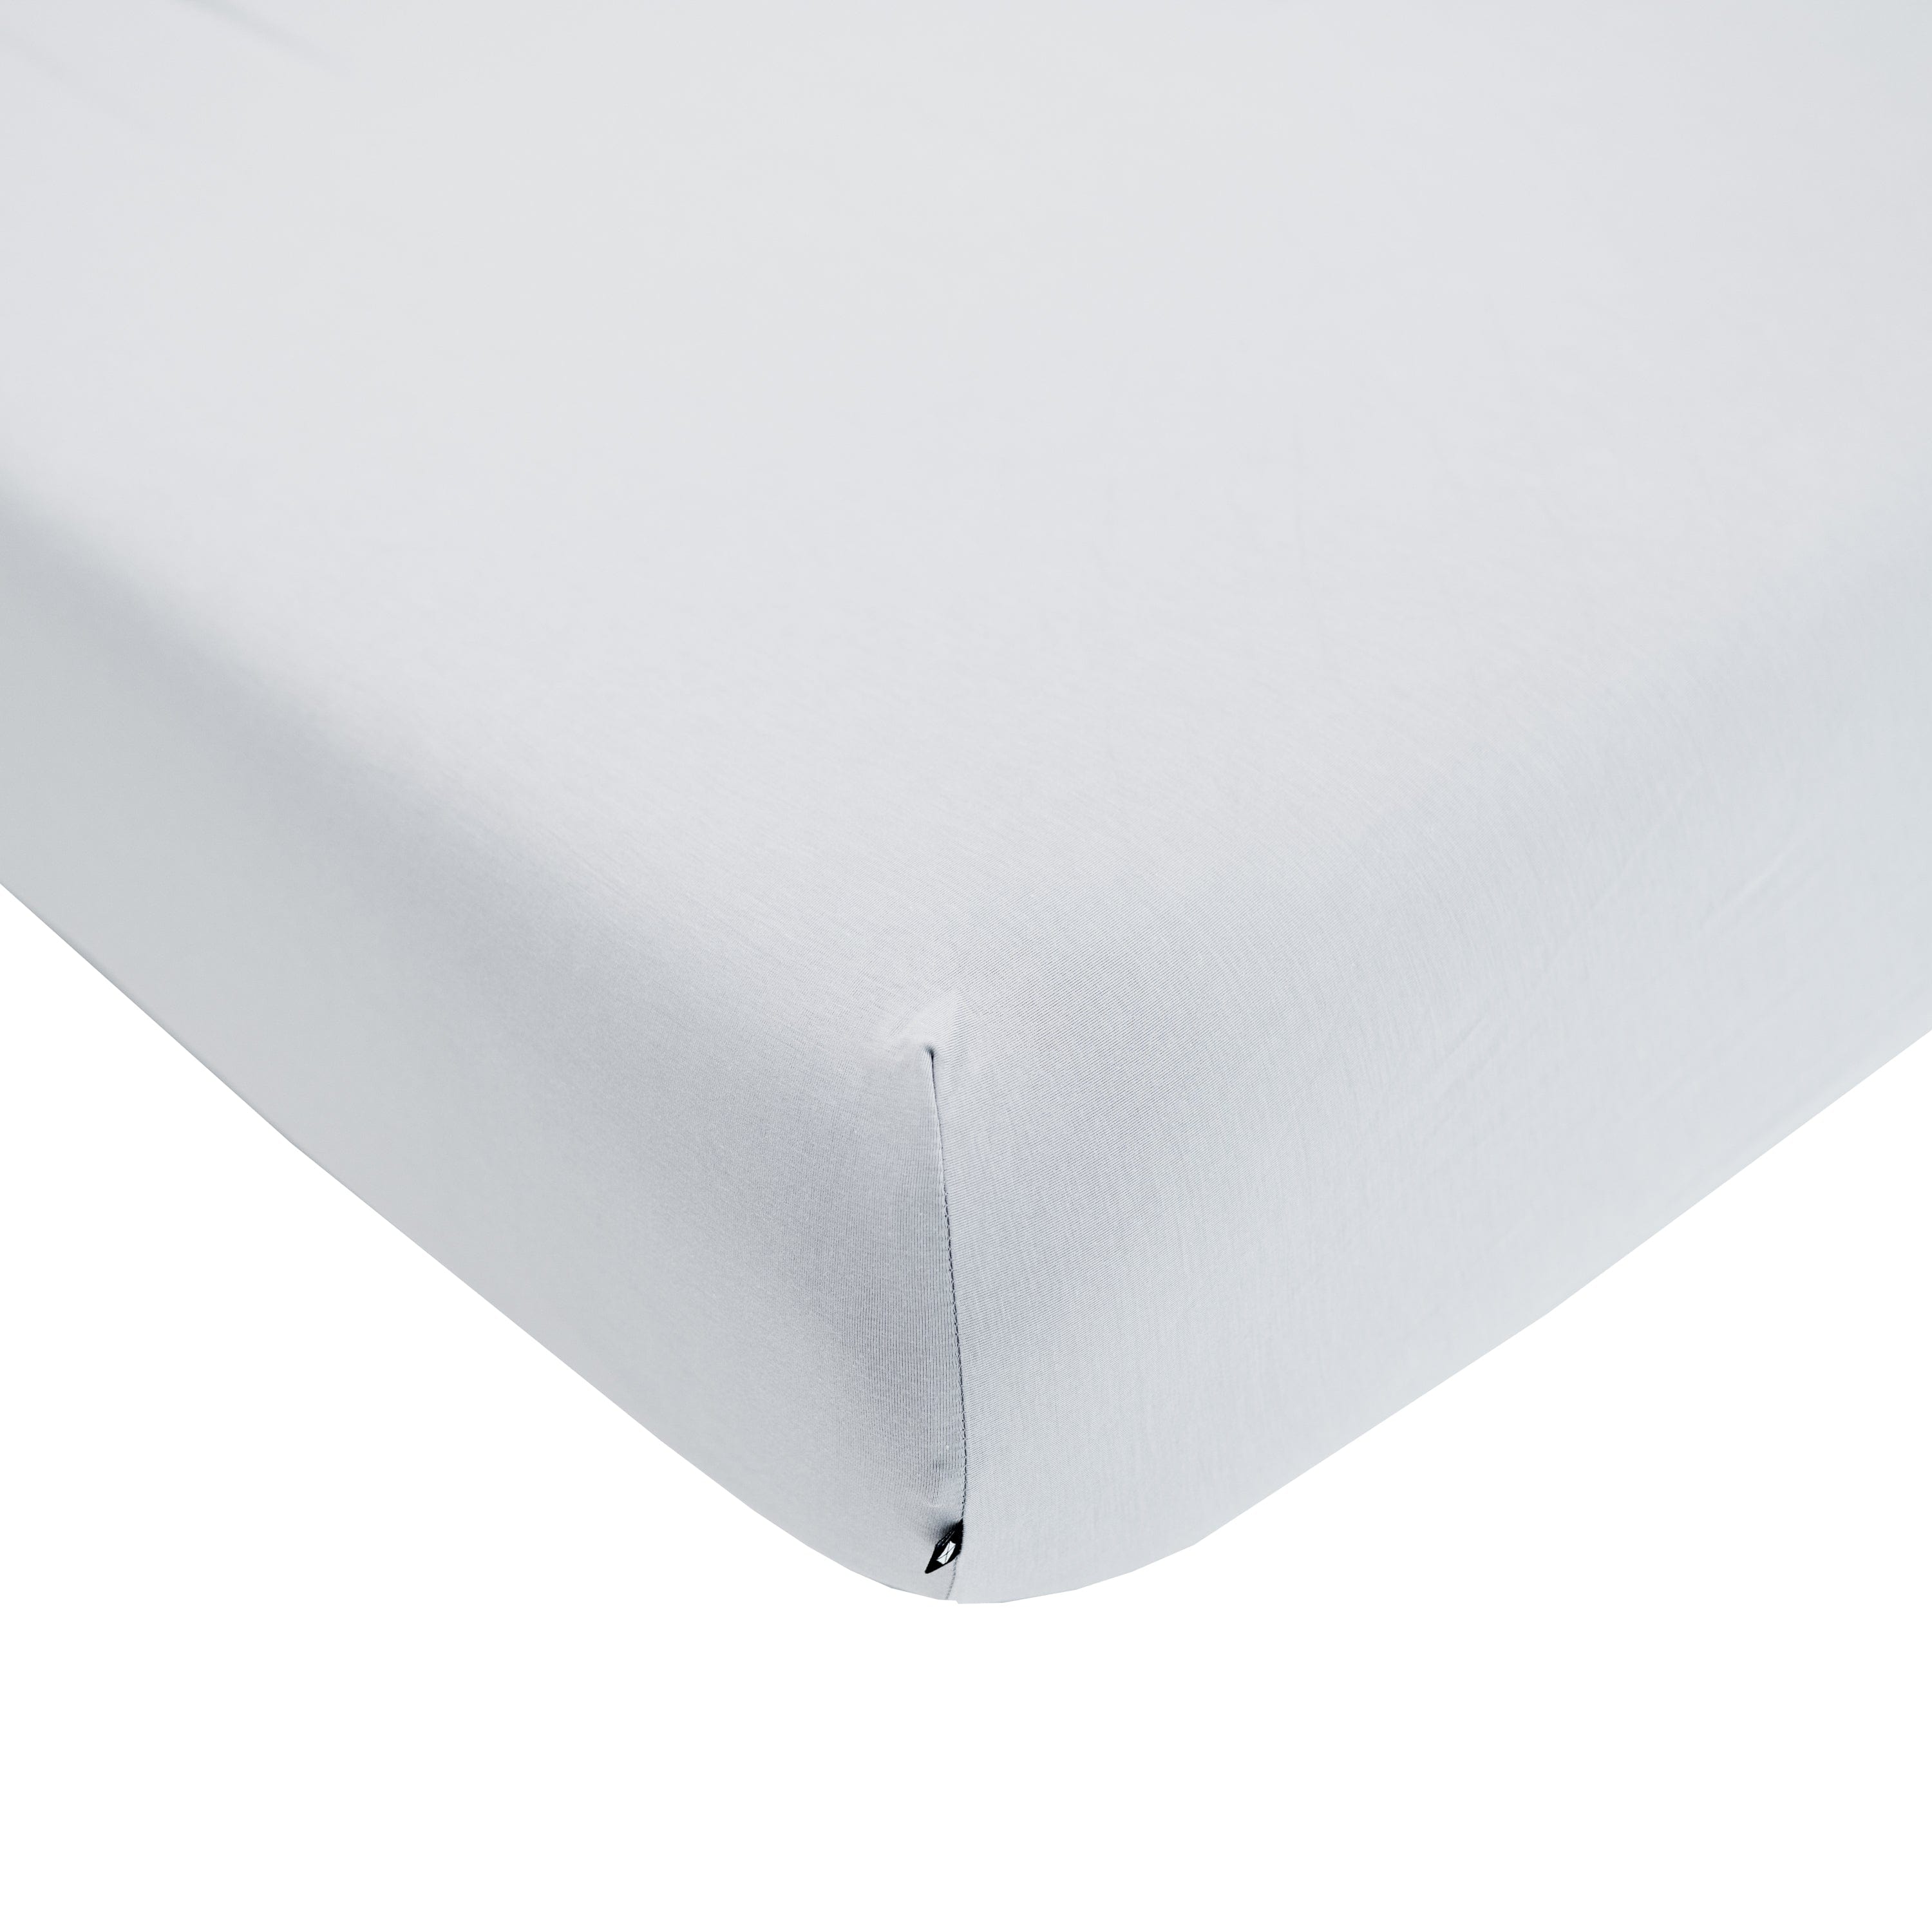 Kyte Baby Queen Sheet Storm / Queen Sheet Queen Fitted Sheet with Pillowcases in Storm